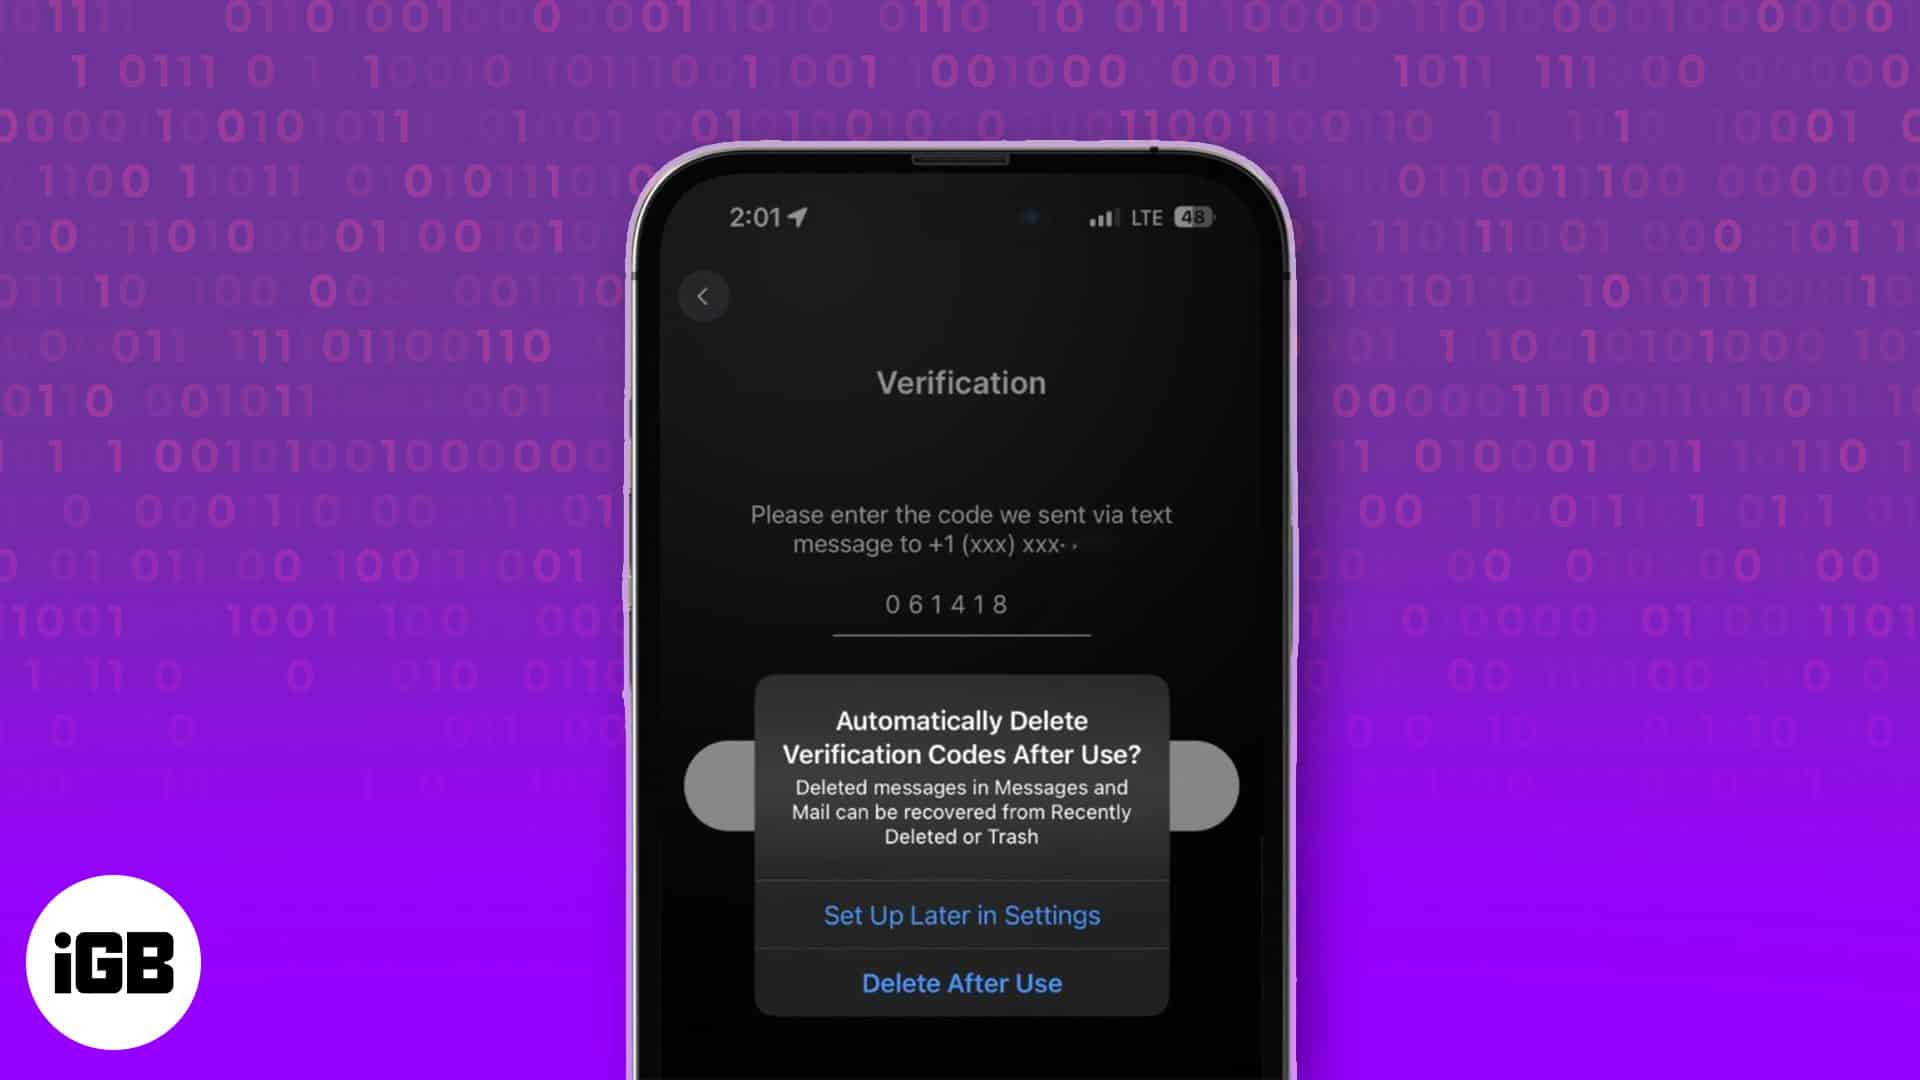 Automatically delete Verification Codes on iPhone